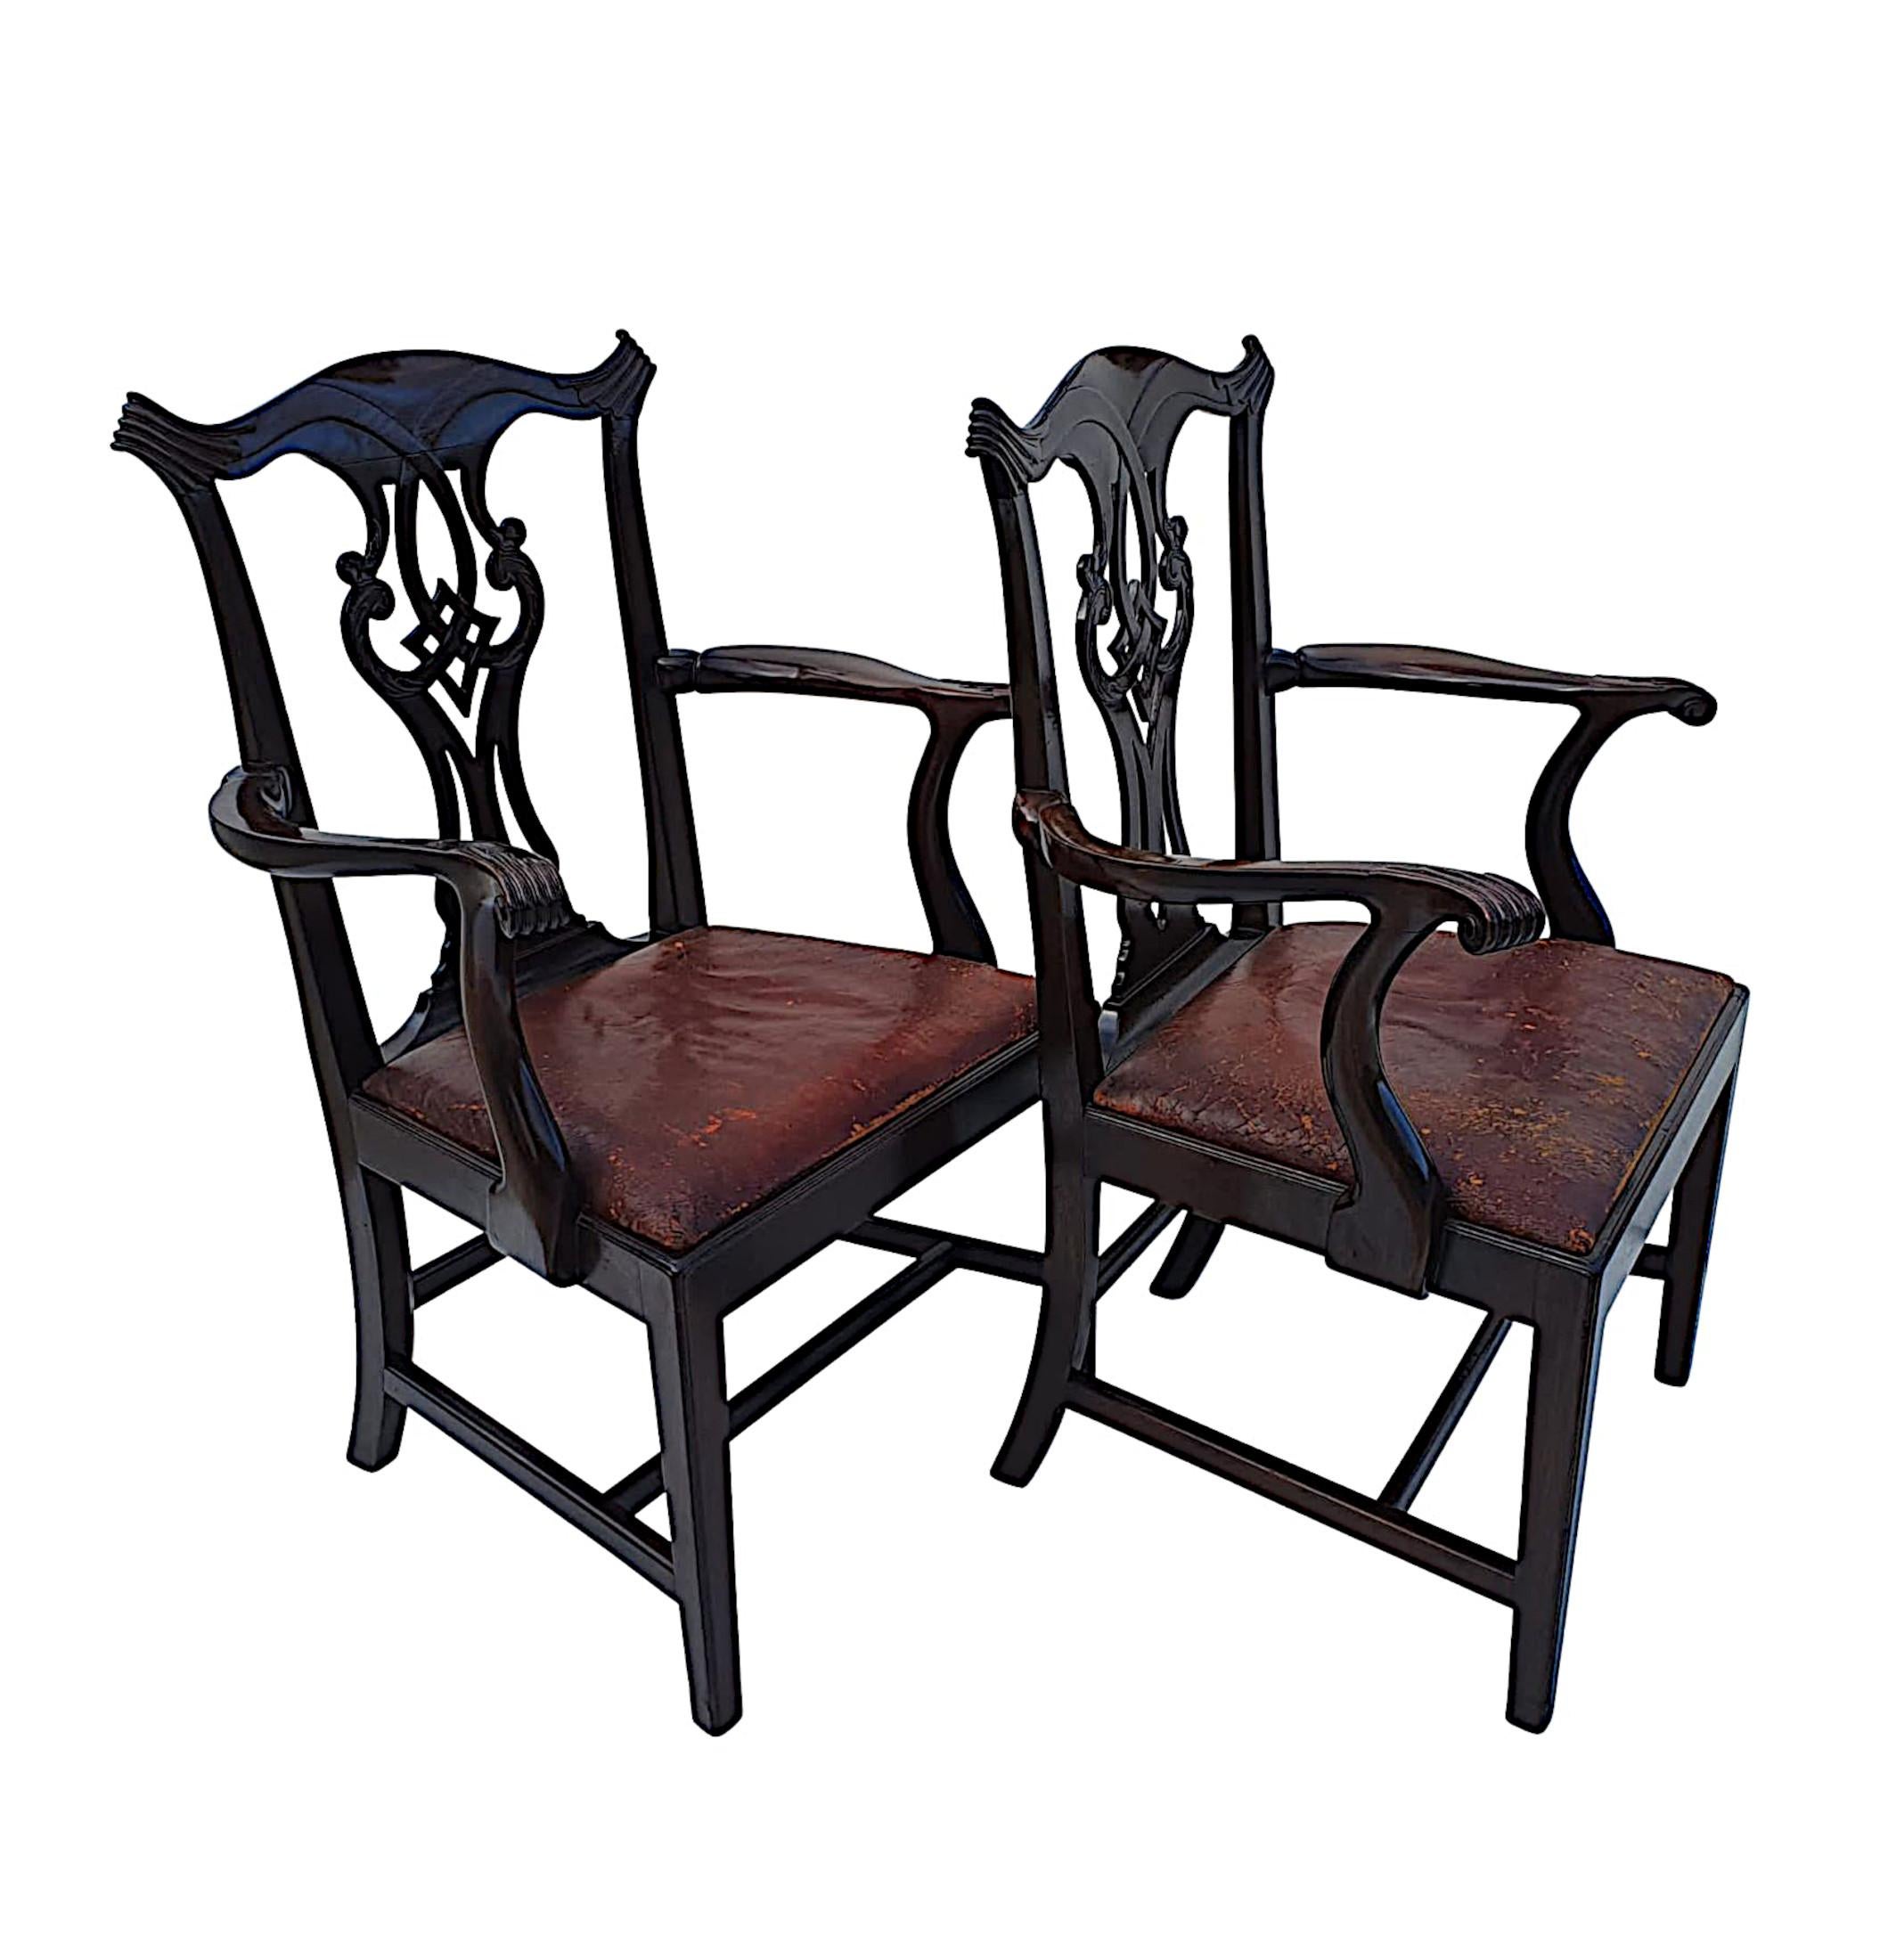 A stunning pair of 19th century Georgian design mahogany open armchairs in the manner of Chippendale. Stunningly hand carved with a lovely patina, the bow shaped top rail with fluted corners is raised over a beautiful pierced interlocking back splat